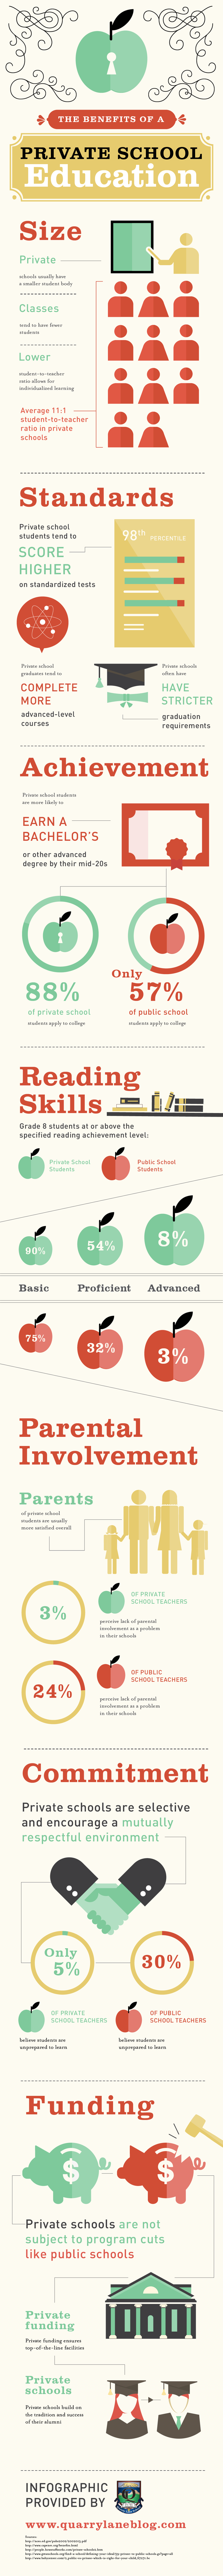 The Benefits of a Private School Education Infographic